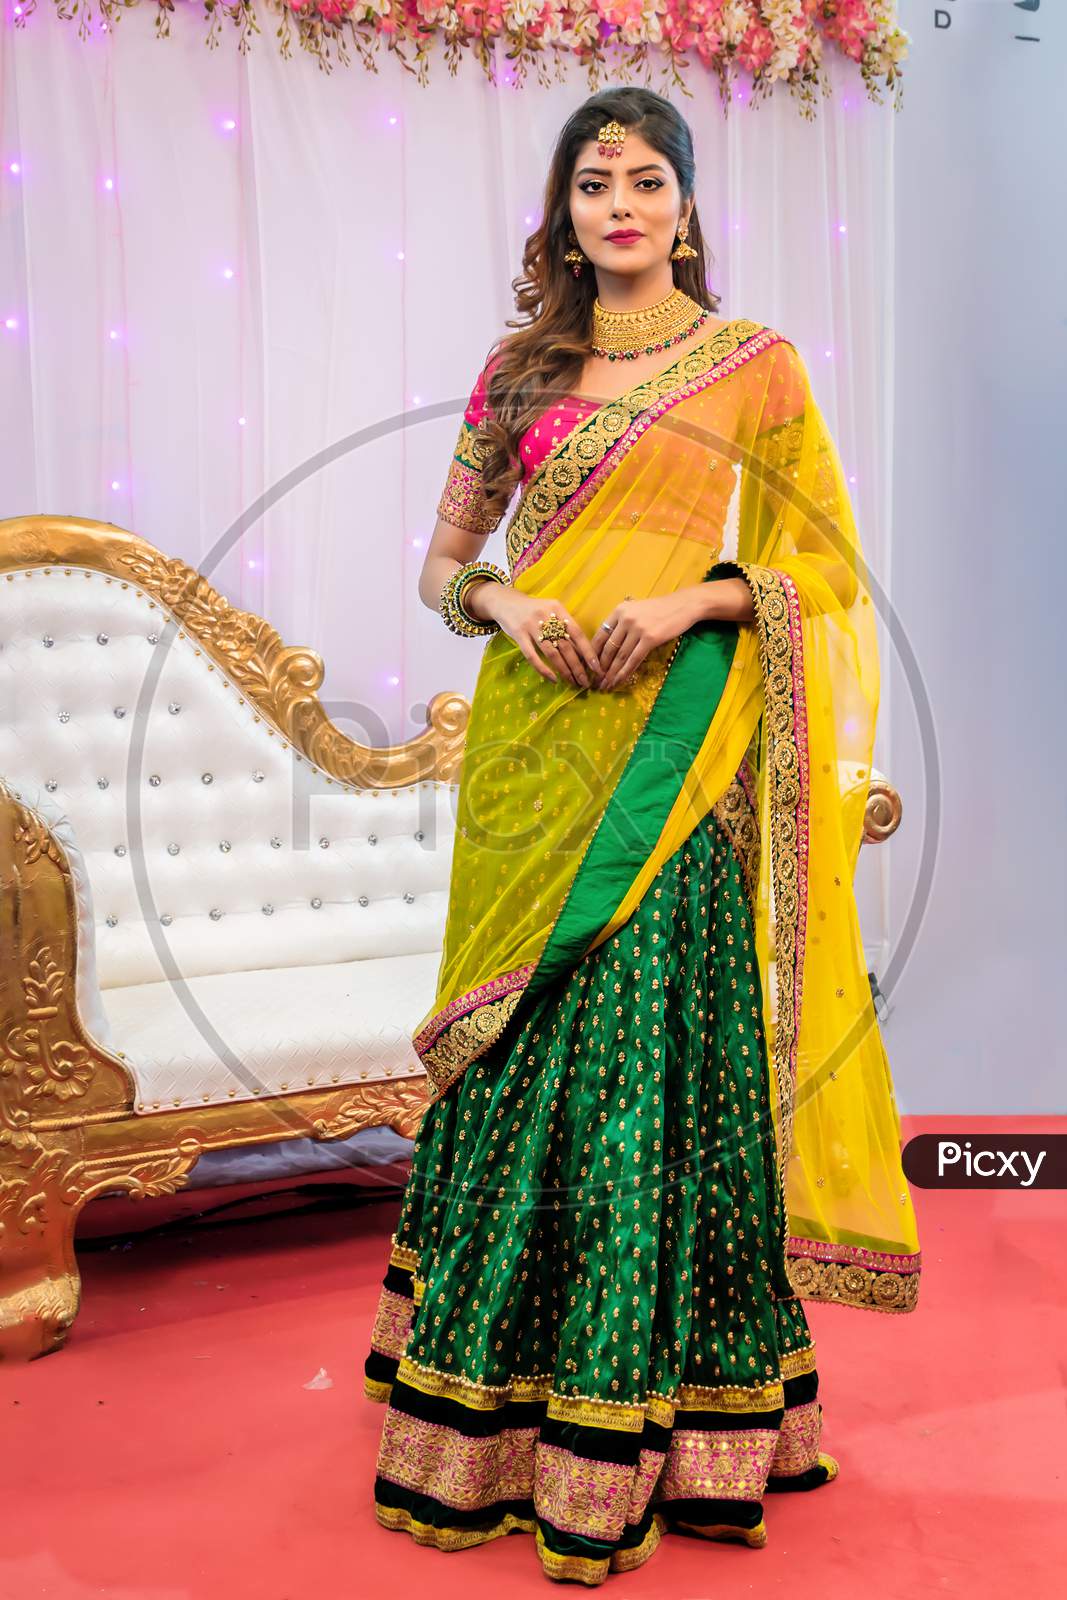 Fashion Portrait Of Beautiful Indian Female Model In A Traditional Indian Saree Wearing Gold Jewellery And Bangles In Kolkata, India On January 2020